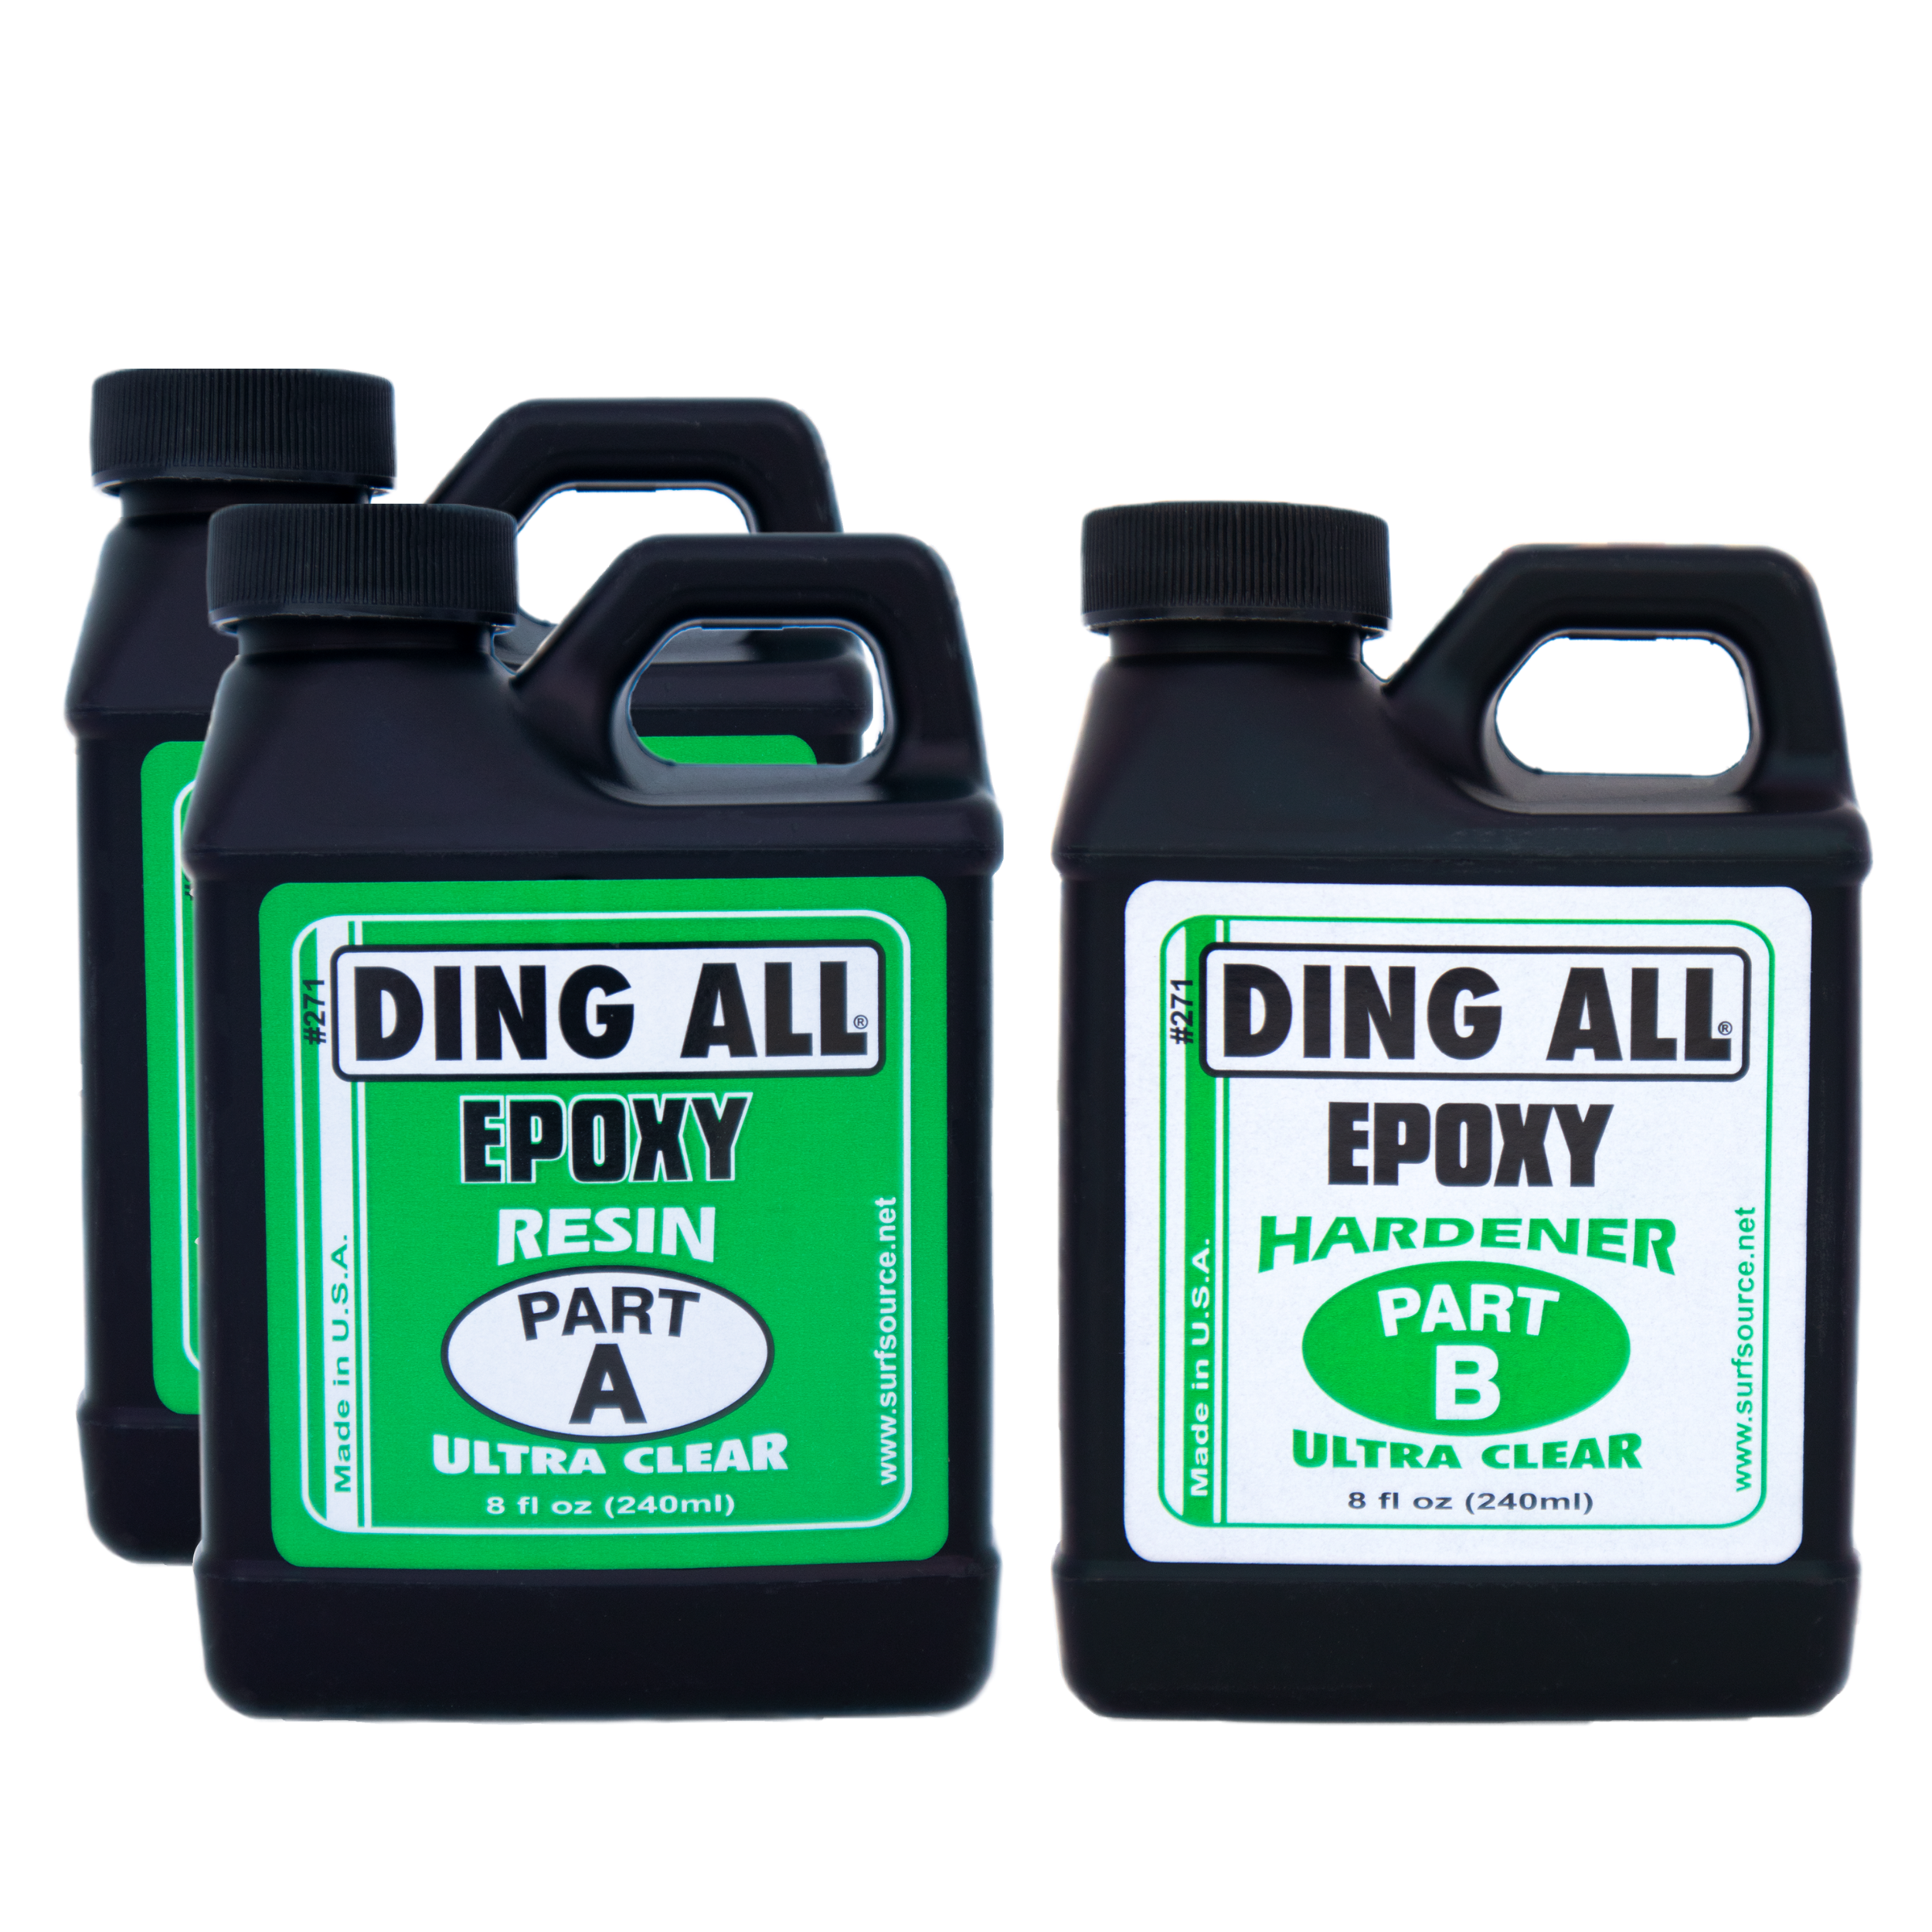 Standard Epoxy Resin Ding Repair Kit - 3 oz – Ding All & SunCure